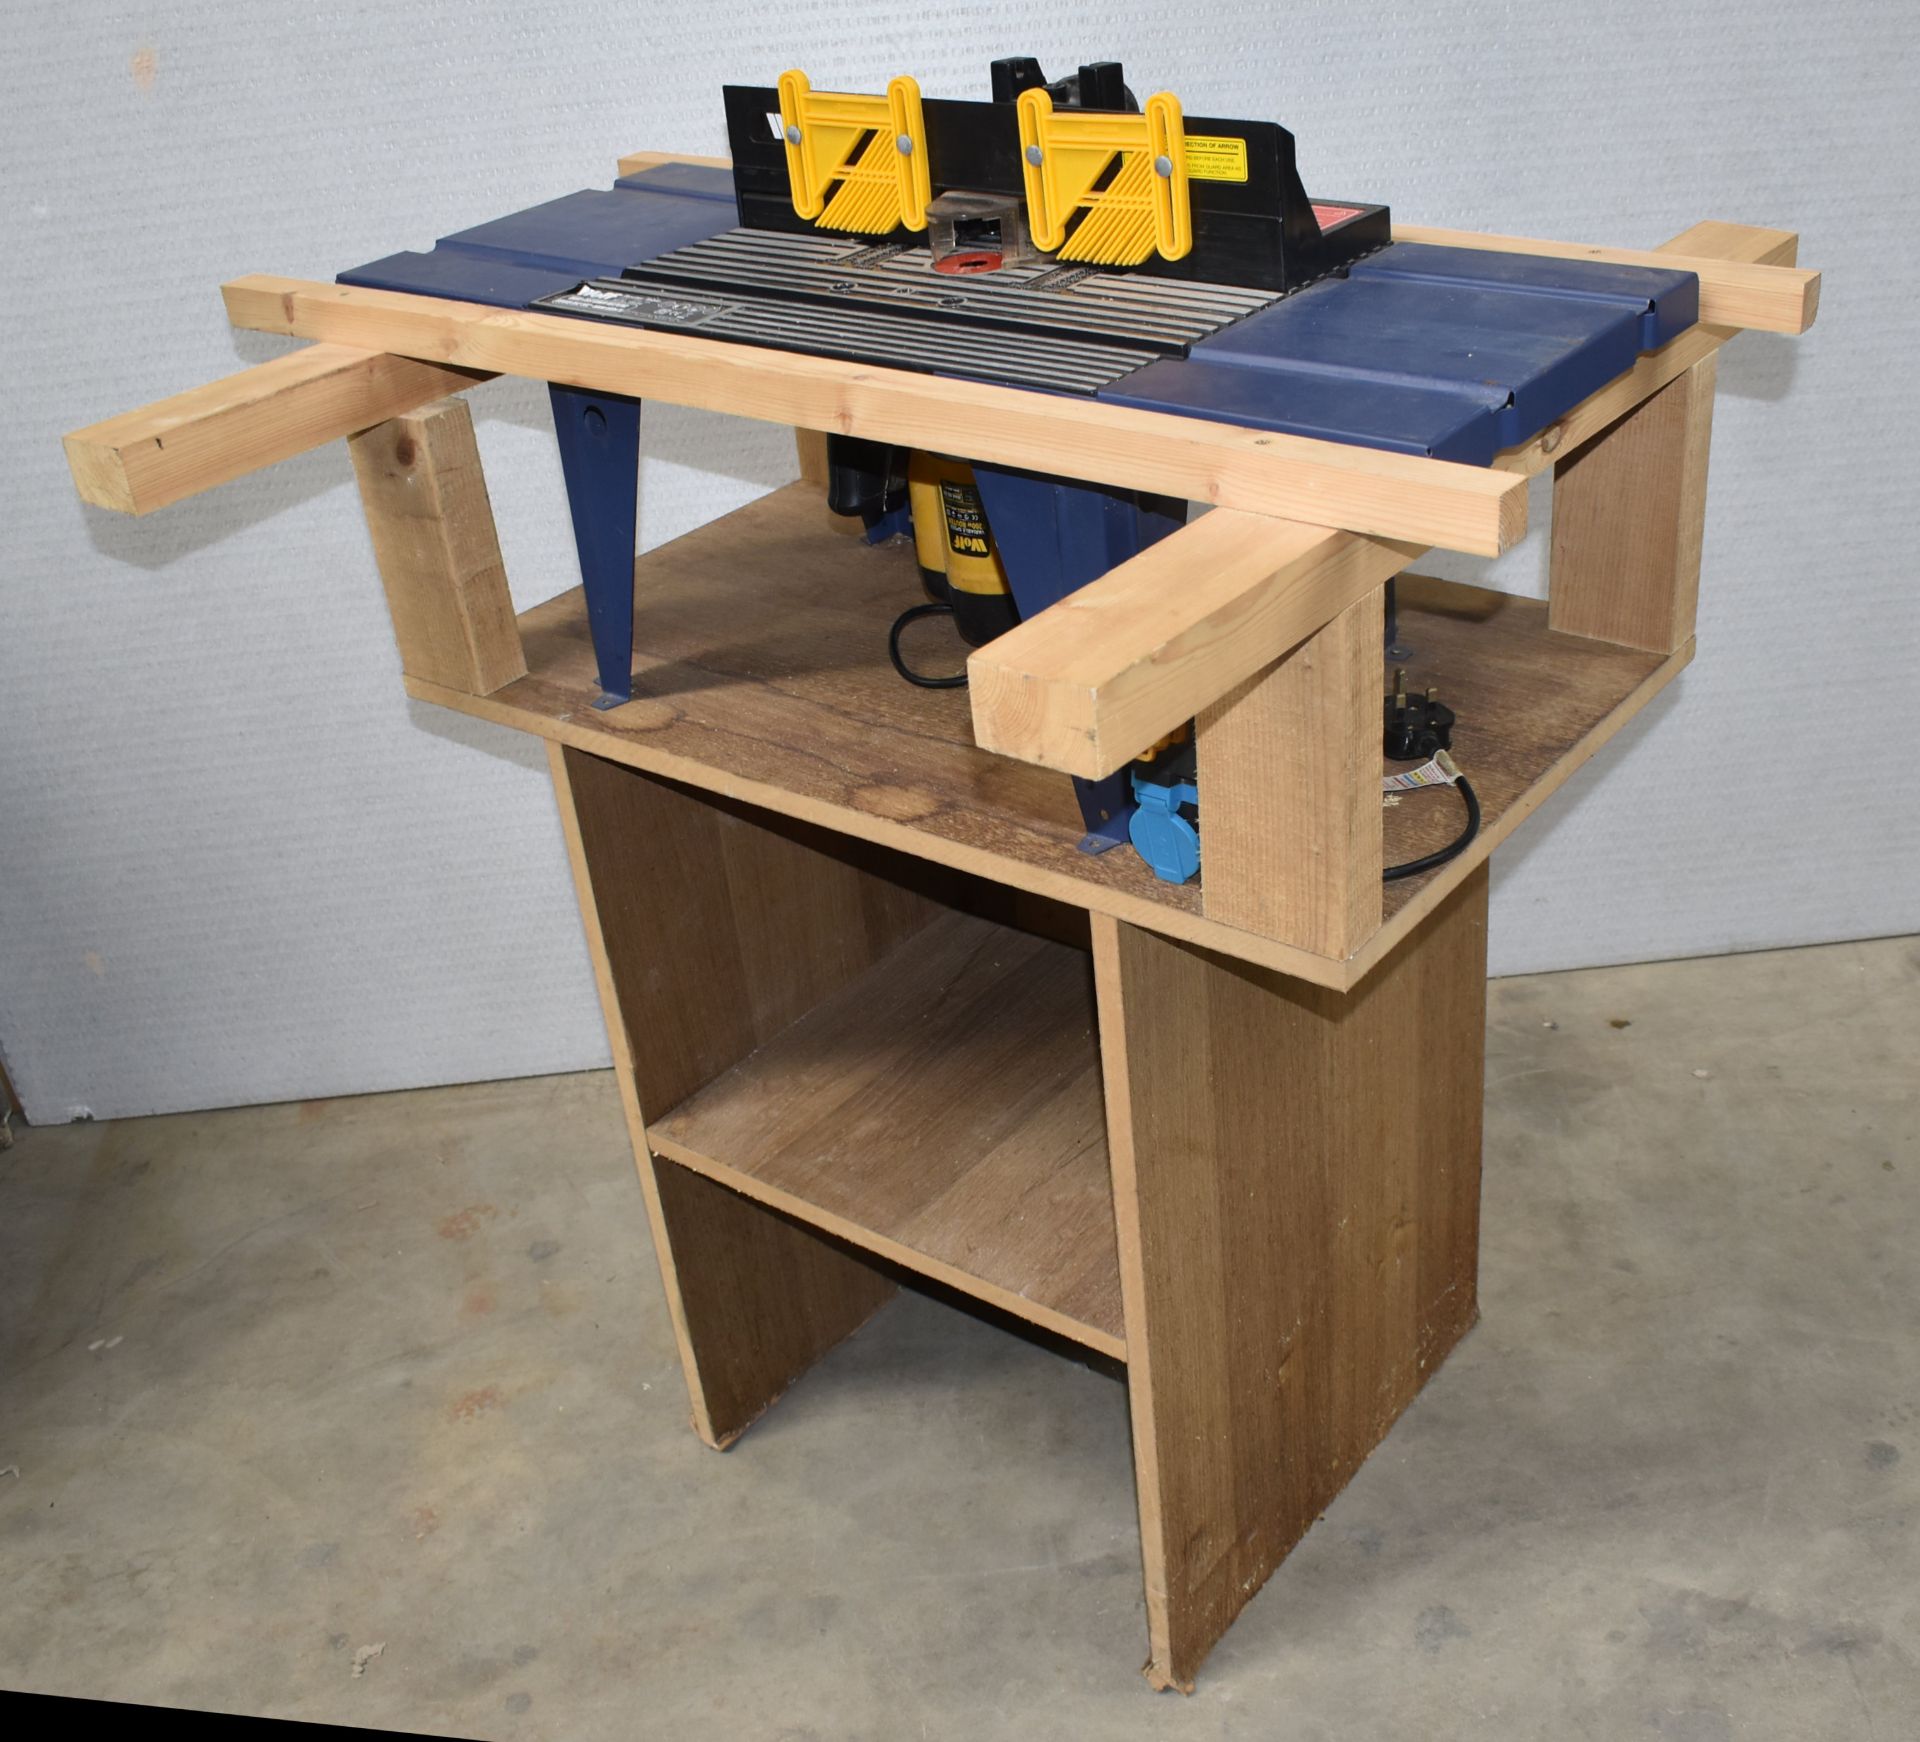 Wolf Router Table and 1200W Wolf Router on Handmade Wooden Workbench - 100(w) x 82(d) x 99(h) cm -